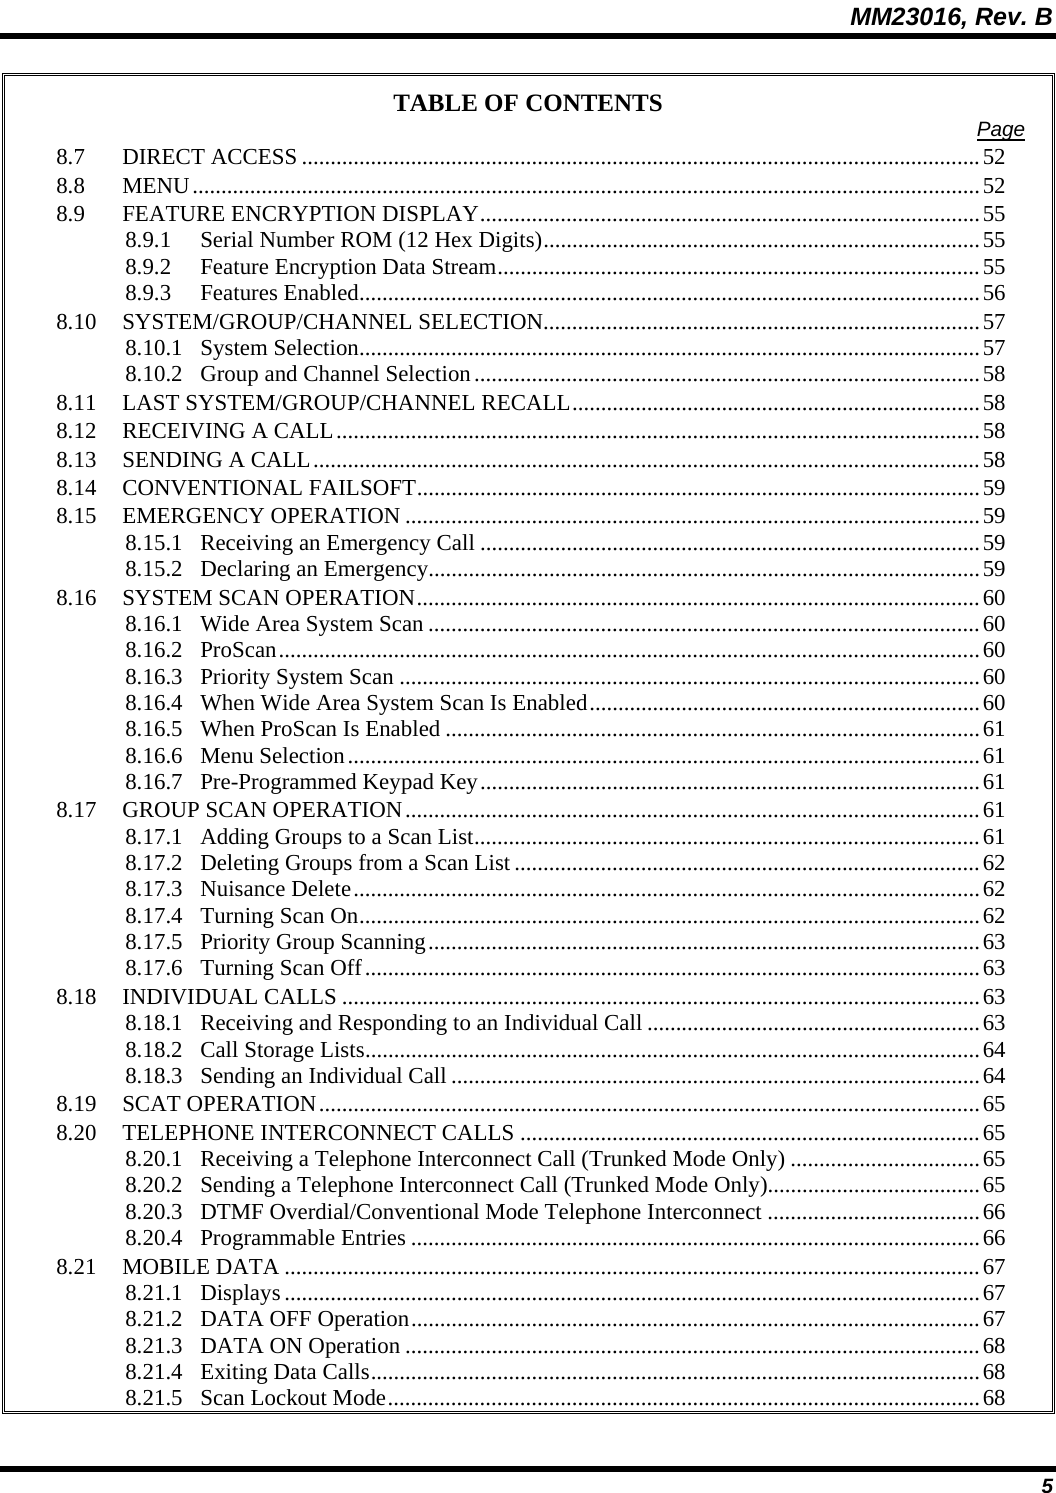 MM23016, Rev. B 5 TABLE OF CONTENTS  Page 8.7 DIRECT ACCESS ......................................................................................................................52 8.8 MENU.........................................................................................................................................52 8.9 FEATURE ENCRYPTION DISPLAY.......................................................................................55 8.9.1 Serial Number ROM (12 Hex Digits)............................................................................55 8.9.2 Feature Encryption Data Stream....................................................................................55 8.9.3 Features Enabled............................................................................................................56 8.10 SYSTEM/GROUP/CHANNEL SELECTION............................................................................57 8.10.1 System Selection............................................................................................................57 8.10.2 Group and Channel Selection........................................................................................58 8.11 LAST SYSTEM/GROUP/CHANNEL RECALL.......................................................................58 8.12 RECEIVING A CALL................................................................................................................58 8.13 SENDING A CALL....................................................................................................................58 8.14 CONVENTIONAL FAILSOFT..................................................................................................59 8.15 EMERGENCY OPERATION ....................................................................................................59 8.15.1 Receiving an Emergency Call .......................................................................................59 8.15.2 Declaring an Emergency................................................................................................59 8.16 SYSTEM SCAN OPERATION..................................................................................................60 8.16.1 Wide Area System Scan ................................................................................................60 8.16.2 ProScan..........................................................................................................................60 8.16.3 Priority System Scan .....................................................................................................60 8.16.4 When Wide Area System Scan Is Enabled....................................................................60 8.16.5 When ProScan Is Enabled .............................................................................................61 8.16.6 Menu Selection..............................................................................................................61 8.16.7 Pre-Programmed Keypad Key.......................................................................................61 8.17 GROUP SCAN OPERATION....................................................................................................61 8.17.1 Adding Groups to a Scan List........................................................................................61 8.17.2 Deleting Groups from a Scan List.................................................................................62 8.17.3 Nuisance Delete.............................................................................................................62 8.17.4 Turning Scan On............................................................................................................62 8.17.5 Priority Group Scanning................................................................................................63 8.17.6 Turning Scan Off...........................................................................................................63 8.18 INDIVIDUAL CALLS ...............................................................................................................63 8.18.1 Receiving and Responding to an Individual Call ..........................................................63 8.18.2 Call Storage Lists...........................................................................................................64 8.18.3 Sending an Individual Call ............................................................................................64 8.19 SCAT OPERATION...................................................................................................................65 8.20 TELEPHONE INTERCONNECT CALLS ................................................................................65 8.20.1 Receiving a Telephone Interconnect Call (Trunked Mode Only) .................................65 8.20.2 Sending a Telephone Interconnect Call (Trunked Mode Only).....................................65 8.20.3 DTMF Overdial/Conventional Mode Telephone Interconnect .....................................66 8.20.4 Programmable Entries ...................................................................................................66 8.21 MOBILE DATA .........................................................................................................................67 8.21.1 Displays .........................................................................................................................67 8.21.2 DATA OFF Operation...................................................................................................67 8.21.3 DATA ON Operation ....................................................................................................68 8.21.4 Exiting Data Calls..........................................................................................................68 8.21.5 Scan Lockout Mode.......................................................................................................68 